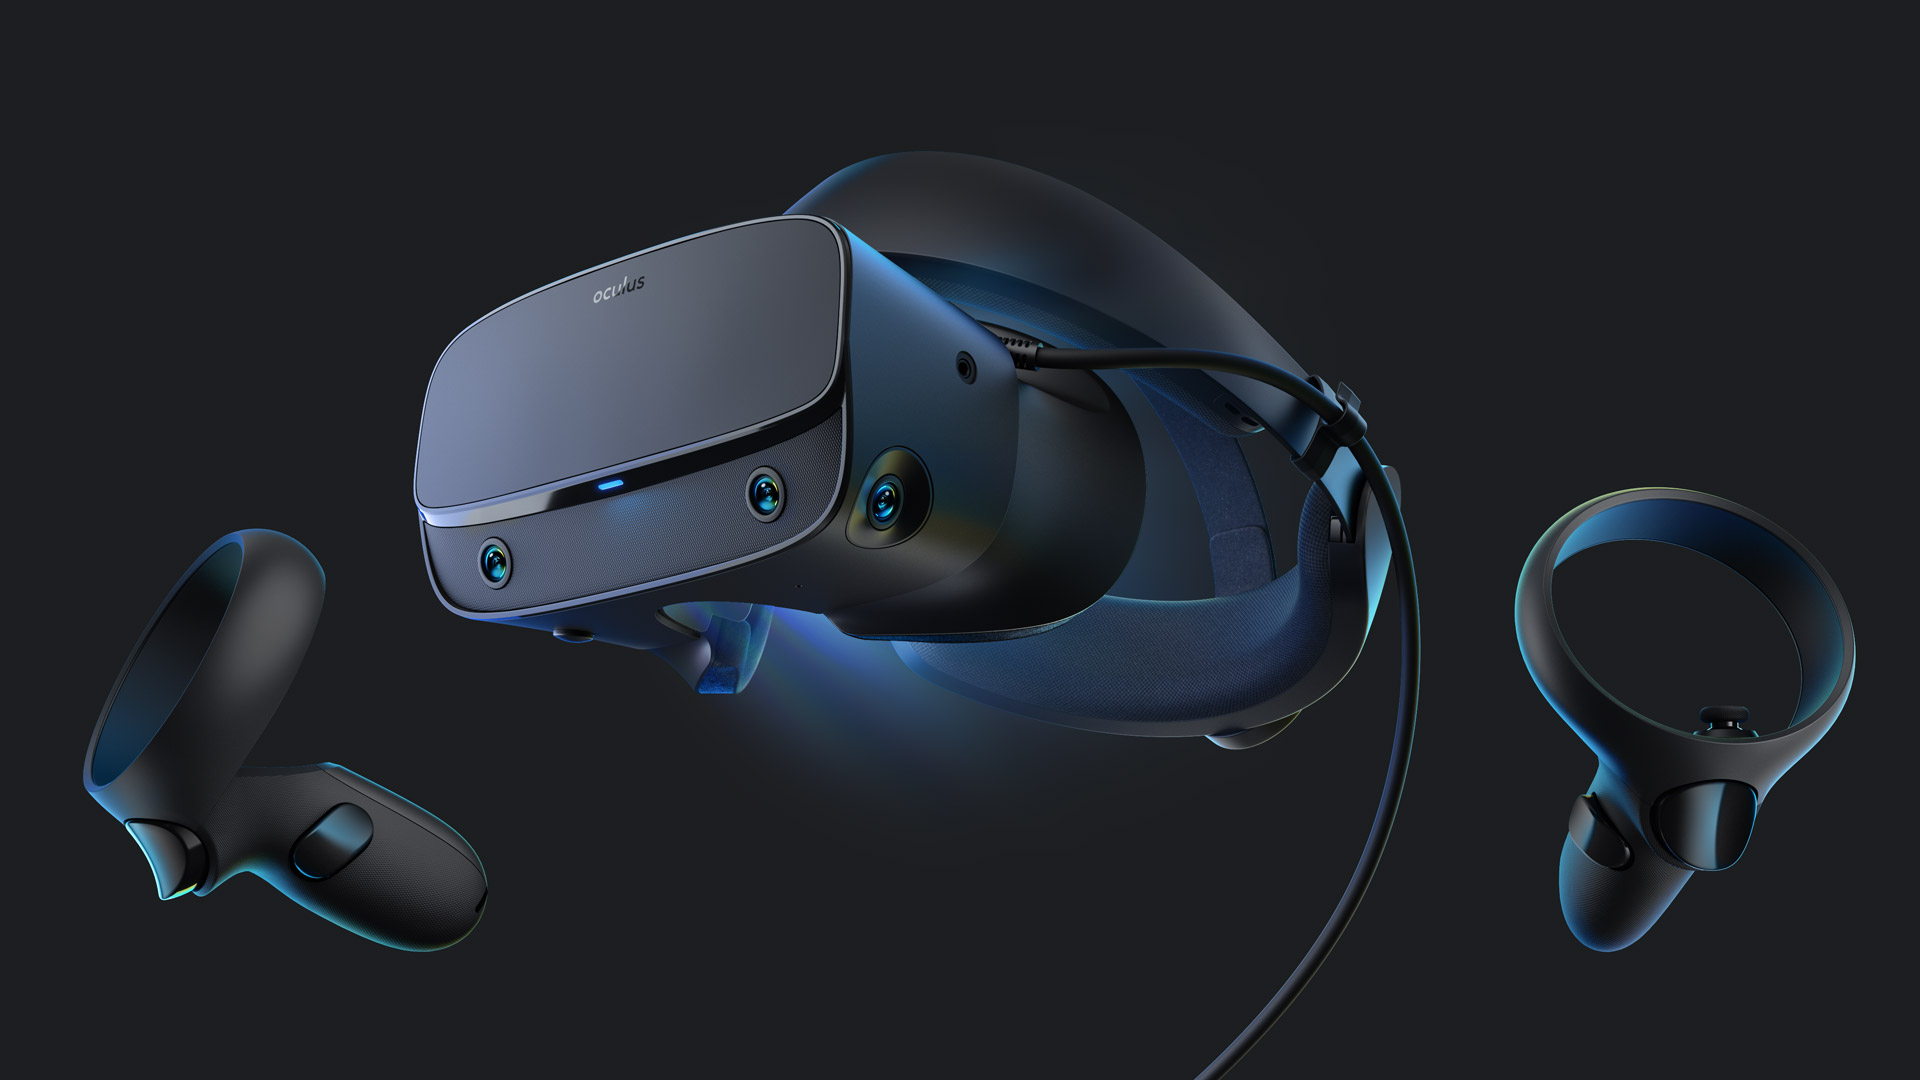 Gdc Oculus Rift S Announced With Price Specs Release Date